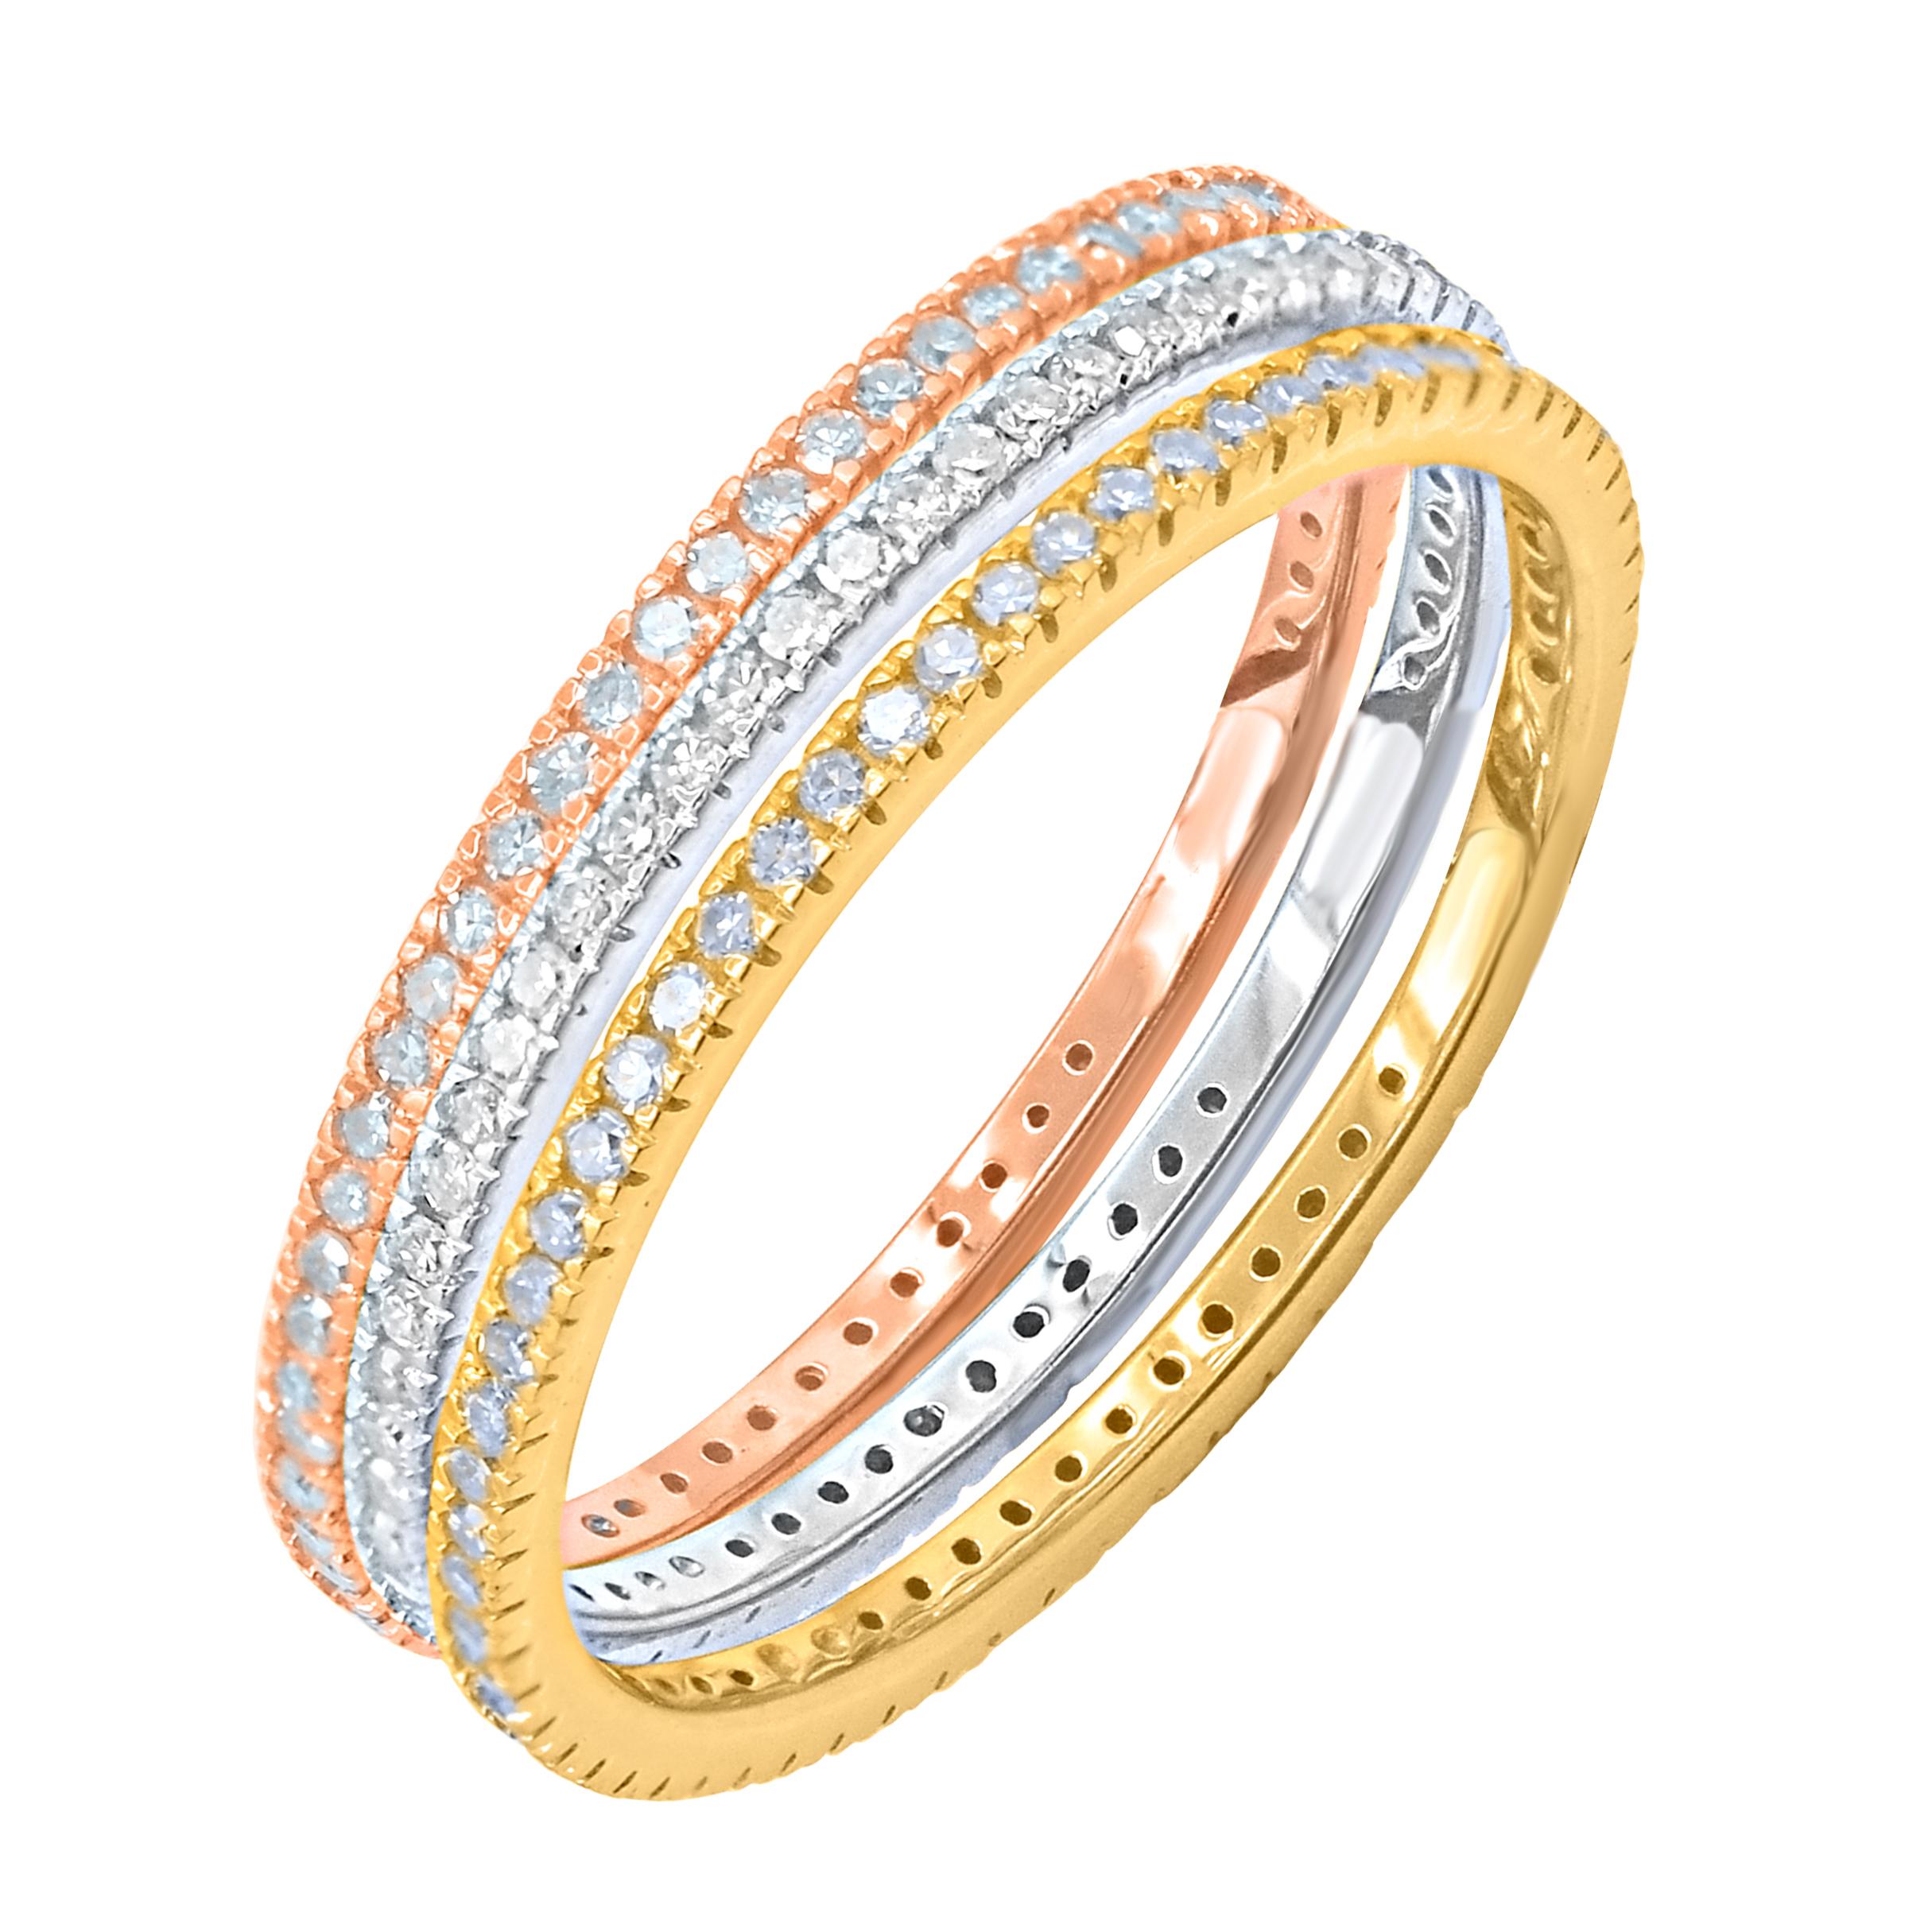 This three-piece diamond band set is a look she'll turn to often. This set includes one piece each rose, yellow and white gold. This ring is beautifully crafted in 14 Karat white, rose and yellow gold and embedded with 168 single cut round diamond